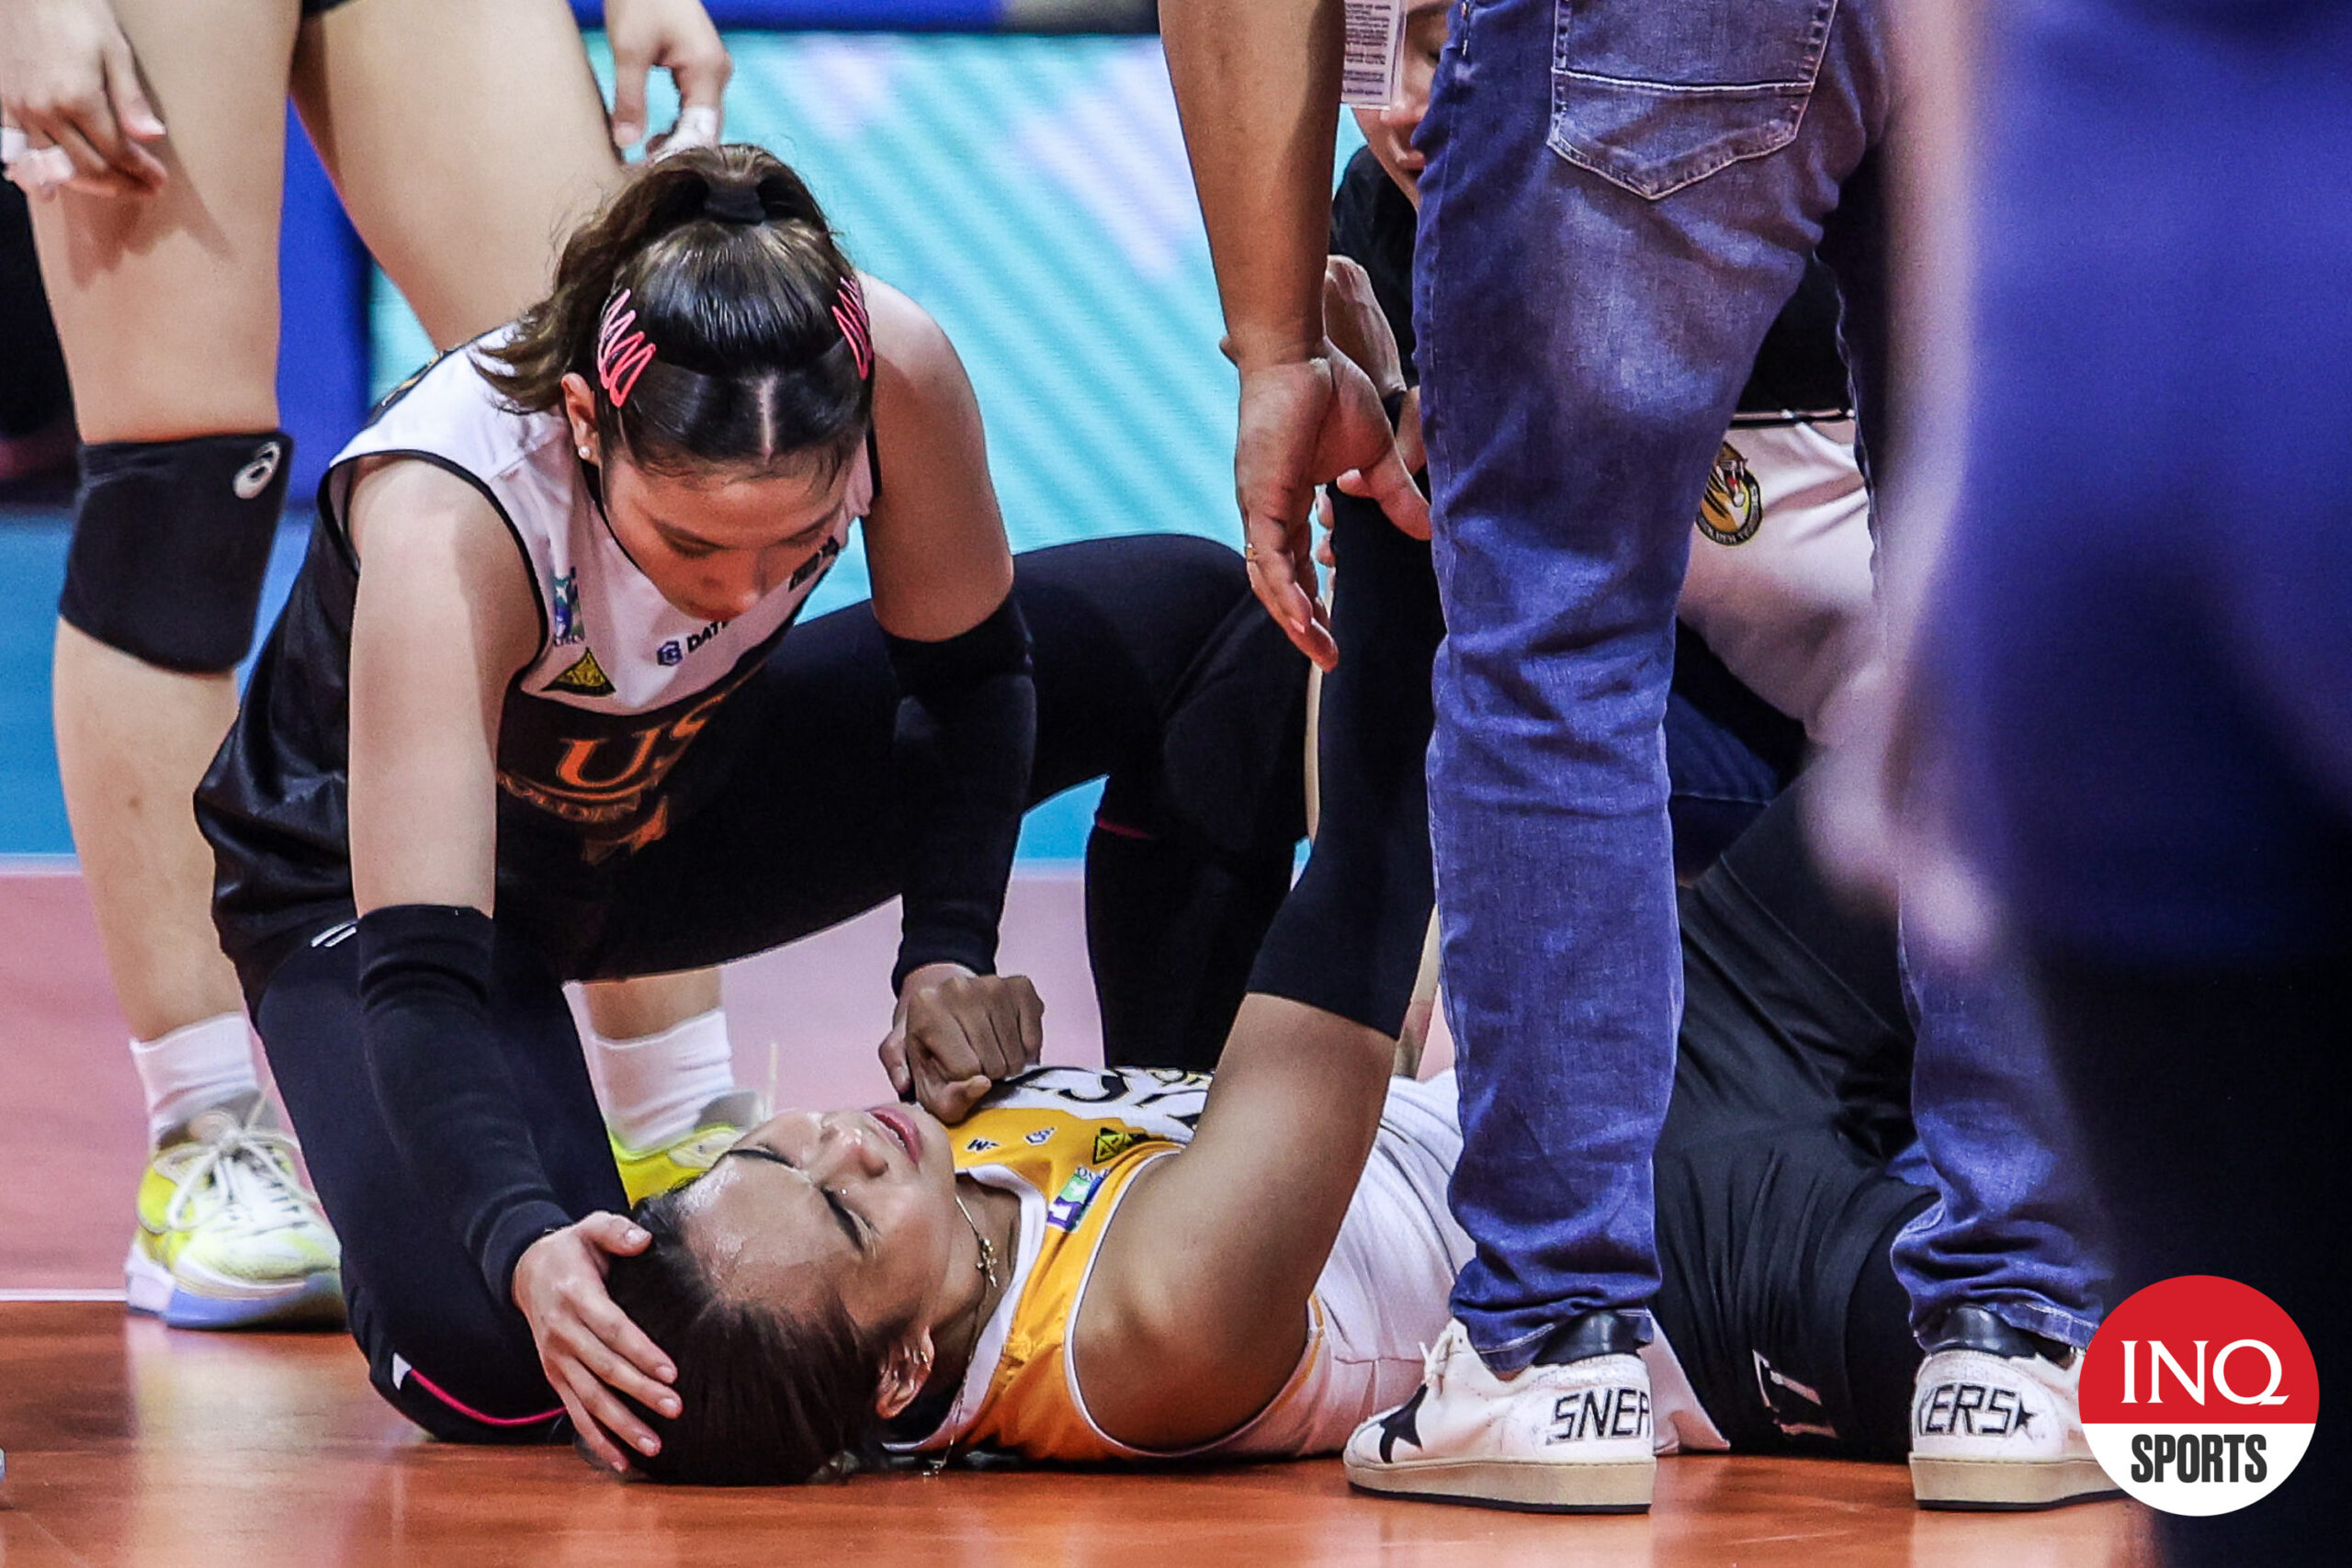 UST Tigresses' rookie Angge Poyos suffers an injury in Game 1 of the UAAP Season 86 women's volleyball finals